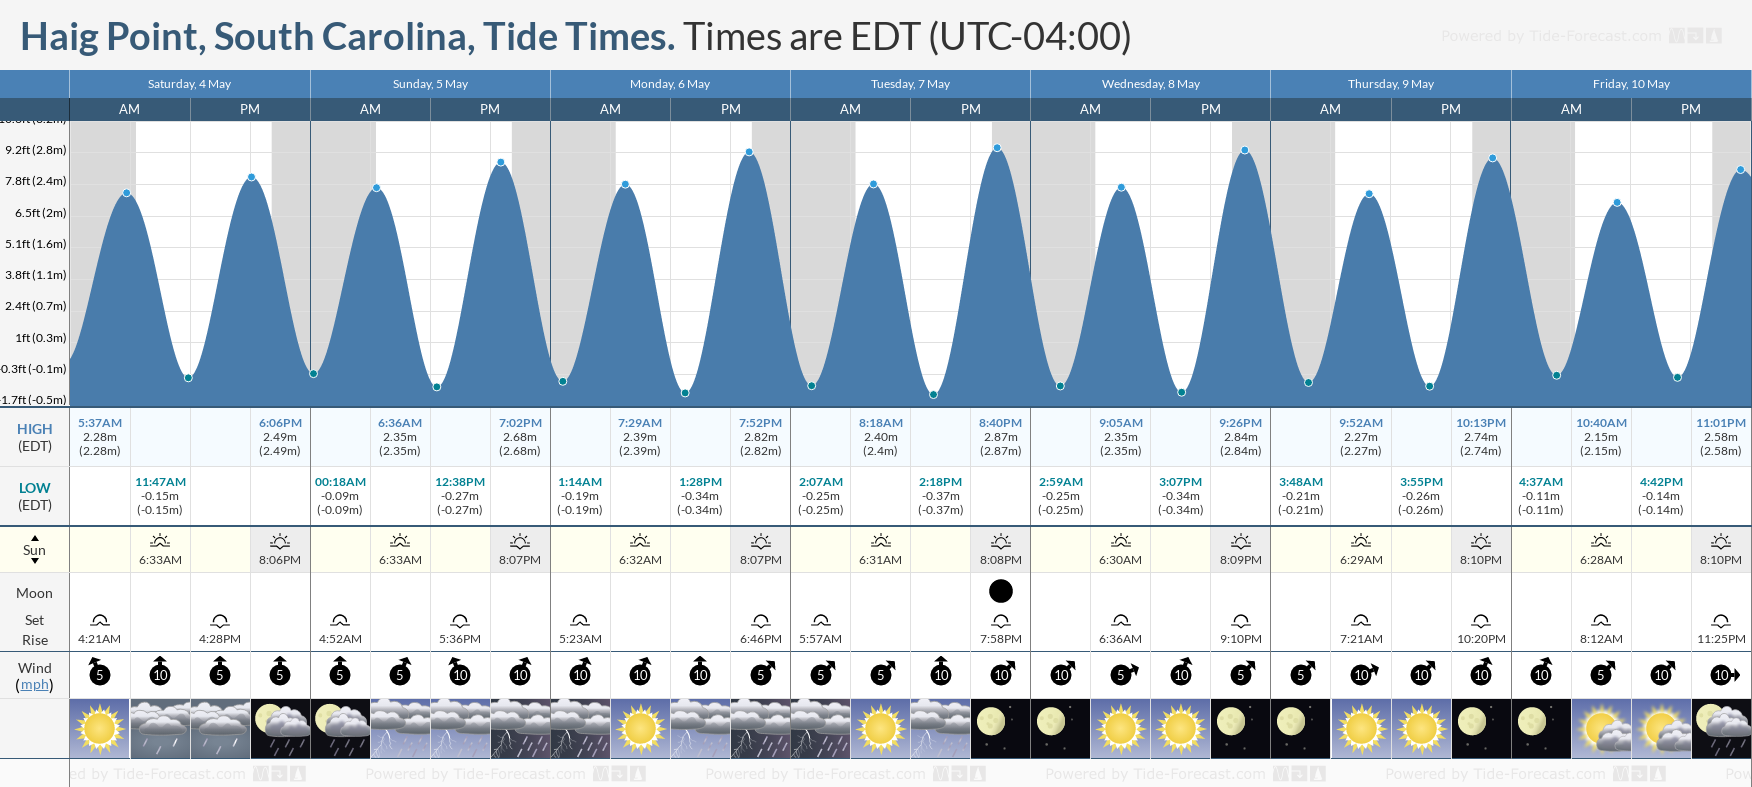 Haig Point, South Carolina Tide Chart including high and low tide tide times for the next 7 days